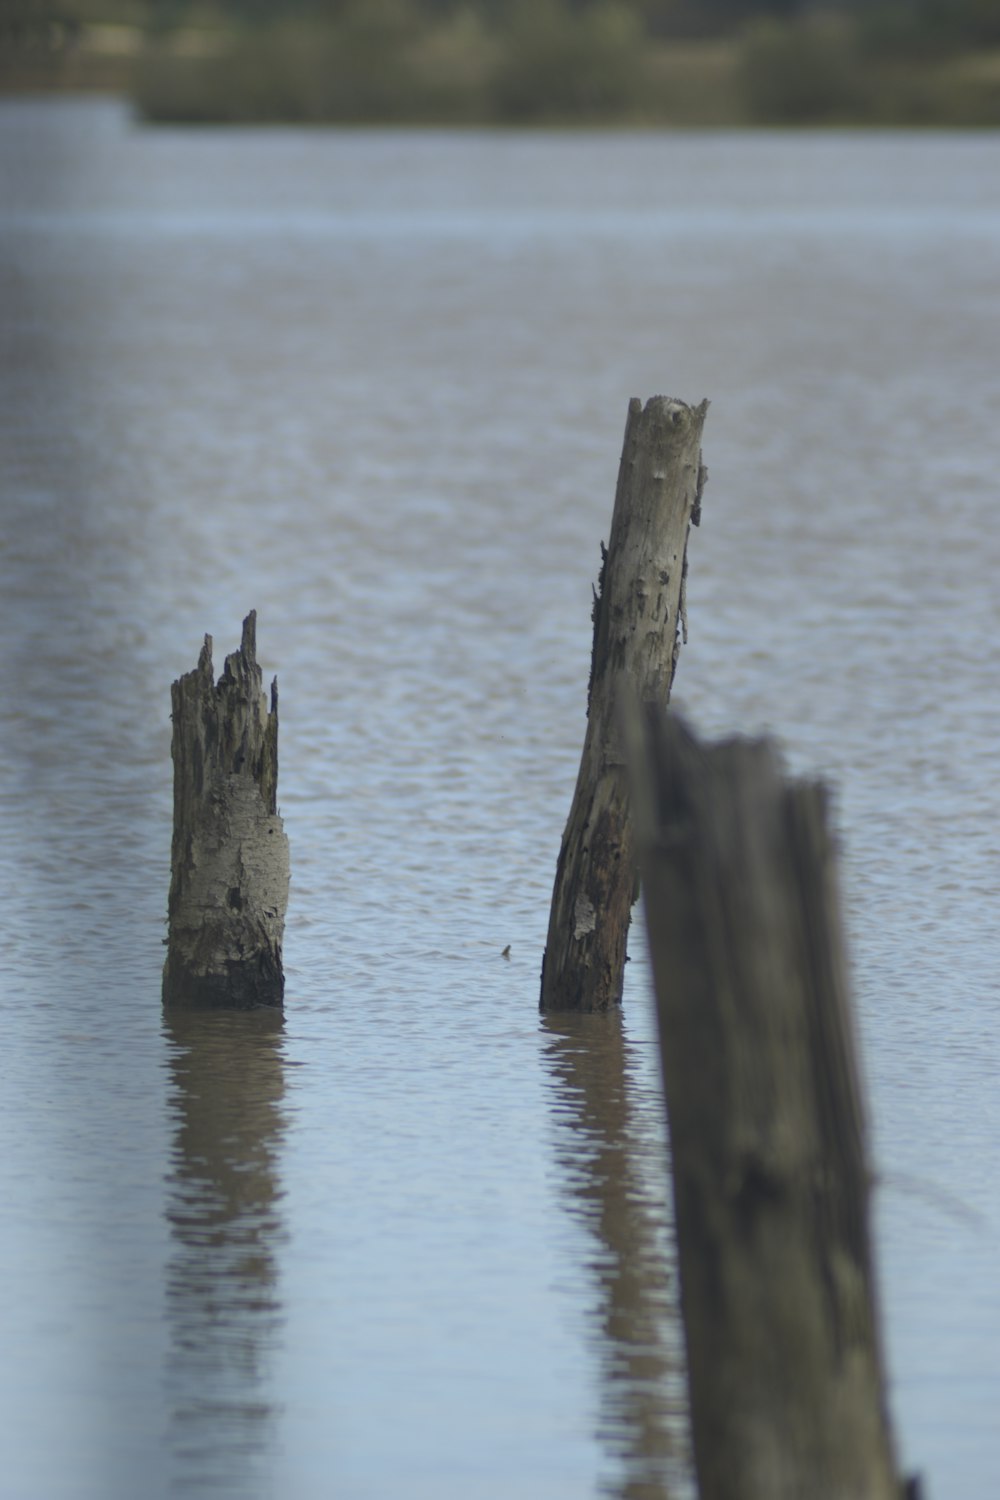 a bird is sitting on a tree stump in the water